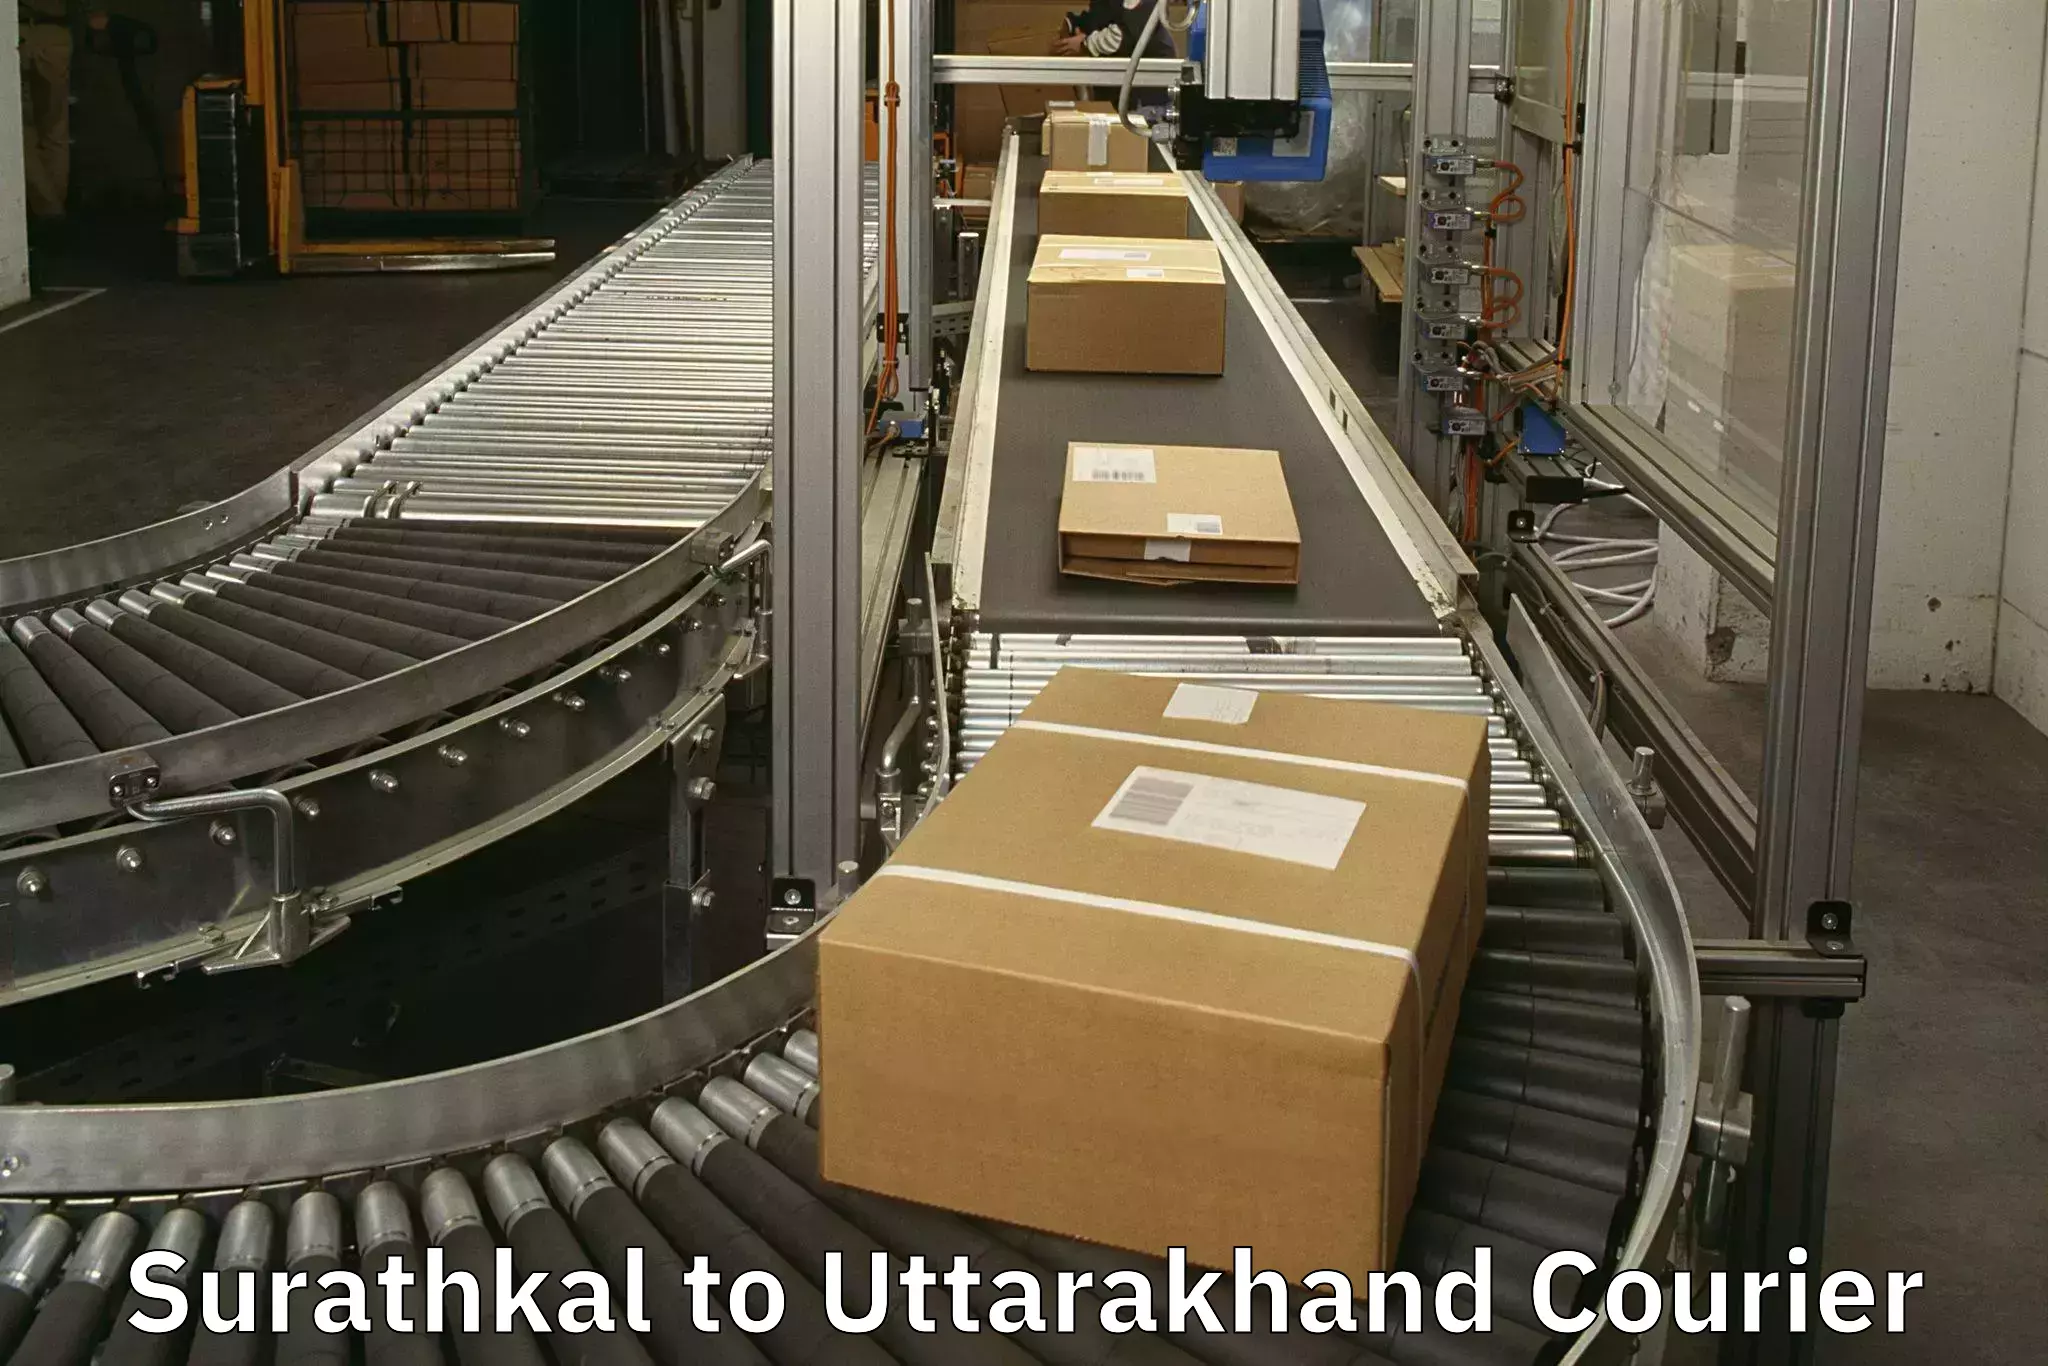 Luggage shipment specialists Surathkal to Nainital